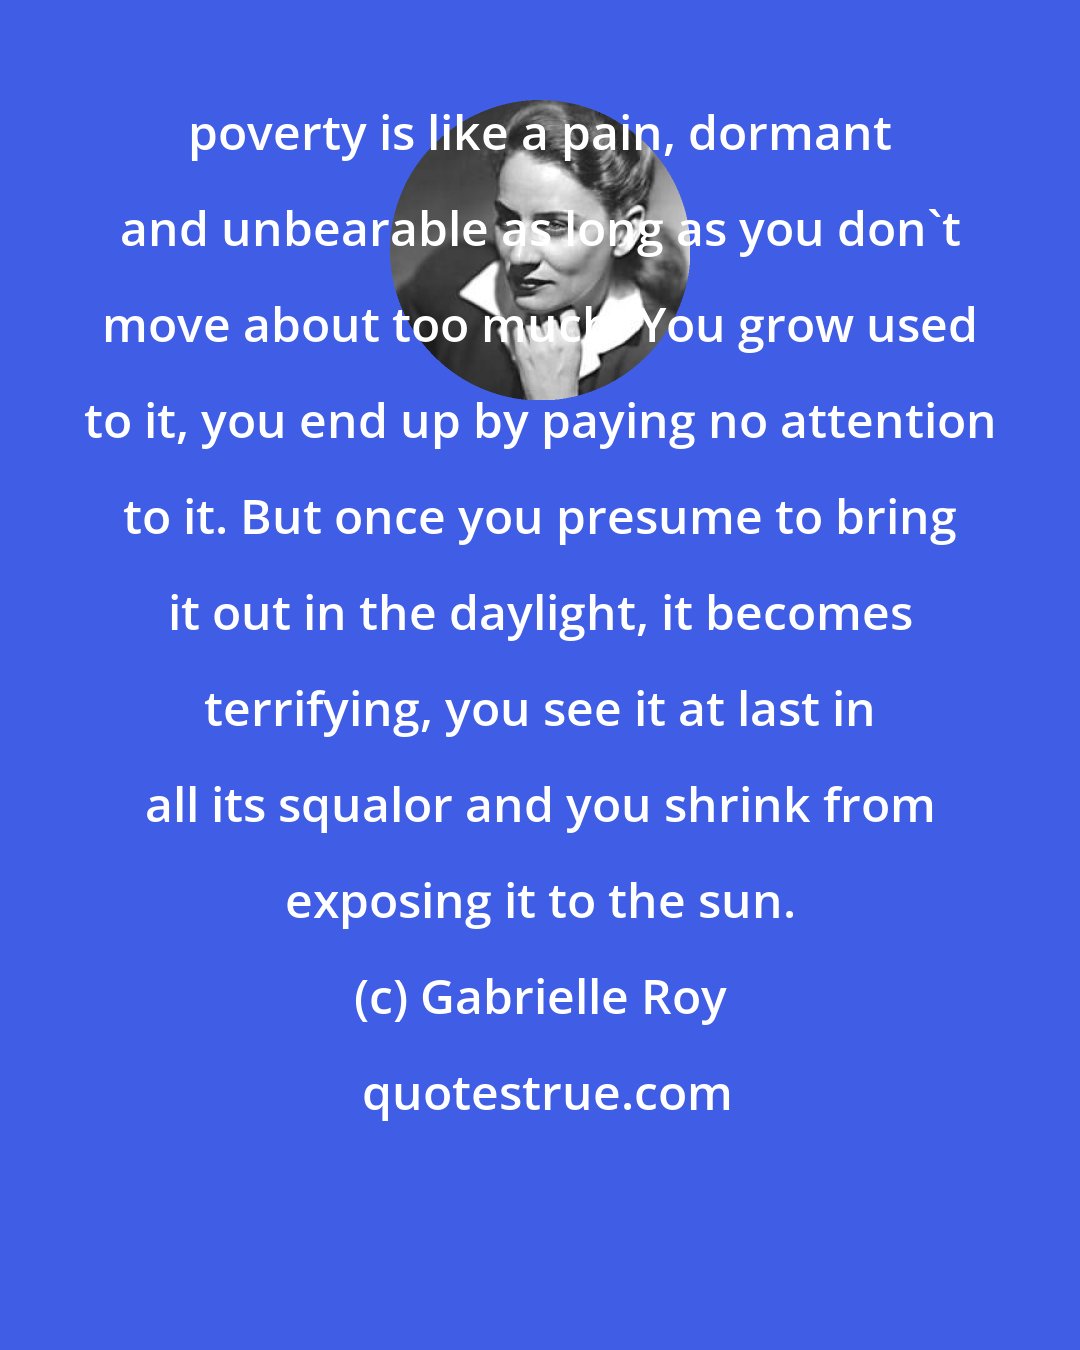 Gabrielle Roy: poverty is like a pain, dormant and unbearable as long as you don't move about too much. You grow used to it, you end up by paying no attention to it. But once you presume to bring it out in the daylight, it becomes terrifying, you see it at last in all its squalor and you shrink from exposing it to the sun.